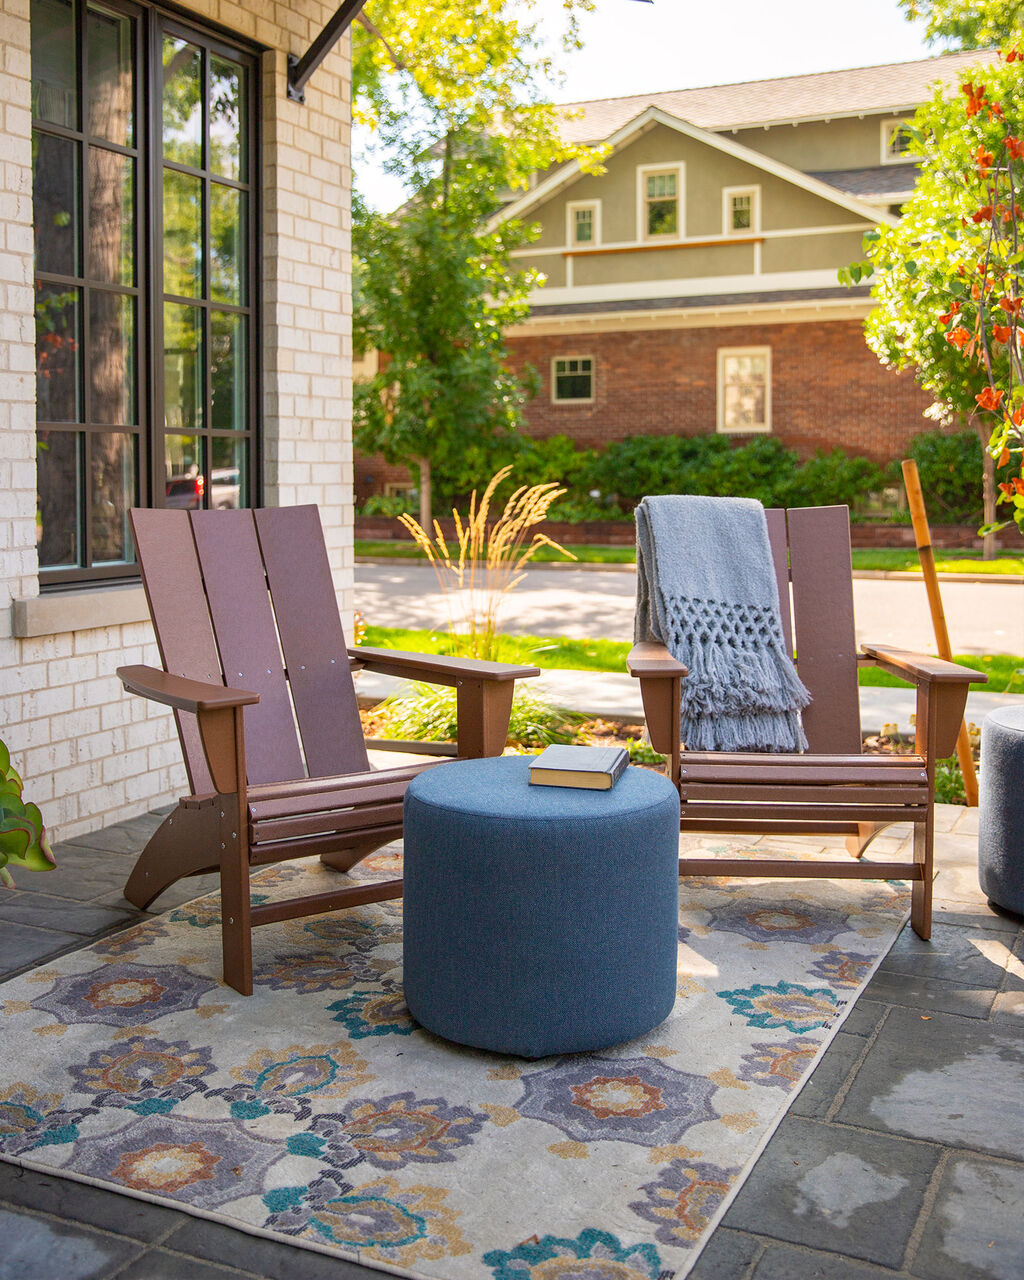 Two brown Adirondack patio chairs made of recycled materials by Polywood accented by a pool stool on an outdoor rug